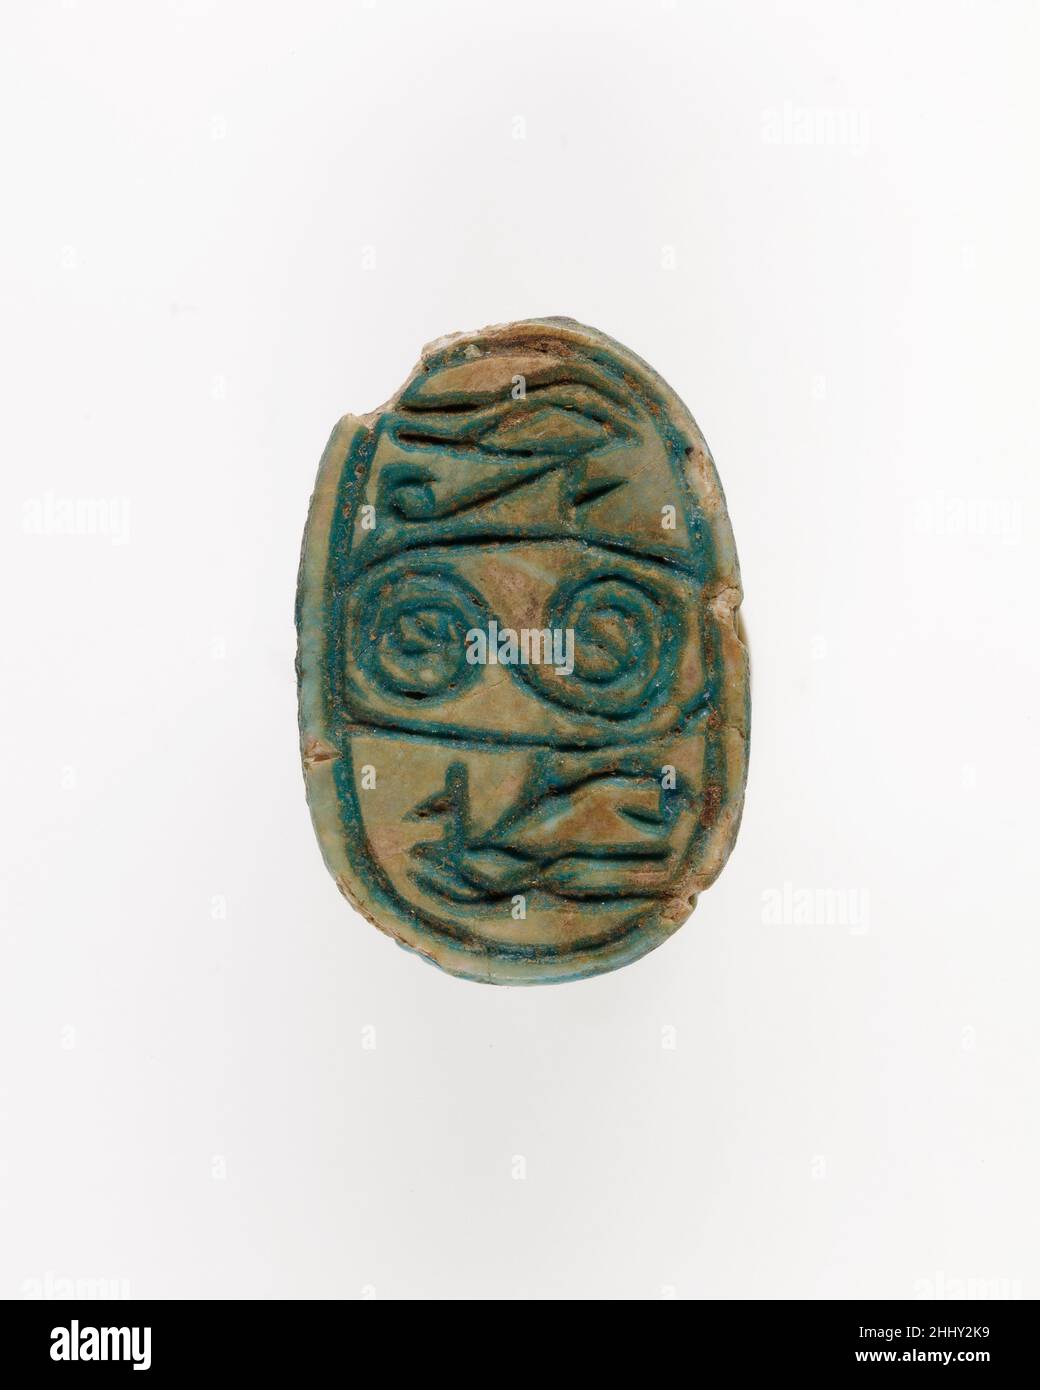 Scarab with Wedjat and Scroll Decoration ca. 1850–1640 B.C. Middle Kingdom The majority of design scarabs of the late Middle Kingdom (late Dynasty 12–Dynasty 13, ca. 1850 –1640 B.C.) are decorated with symmetric compositions of protective hieroglyphs and/or scrolls. This scarab shows wedjat-eyes on either side of a scroll. As the healed eye of Horus, the wedjat is a powerful symbol, representing health and regeneration.. Scarab with Wedjat and Scroll Decoration  557101 Stock Photo